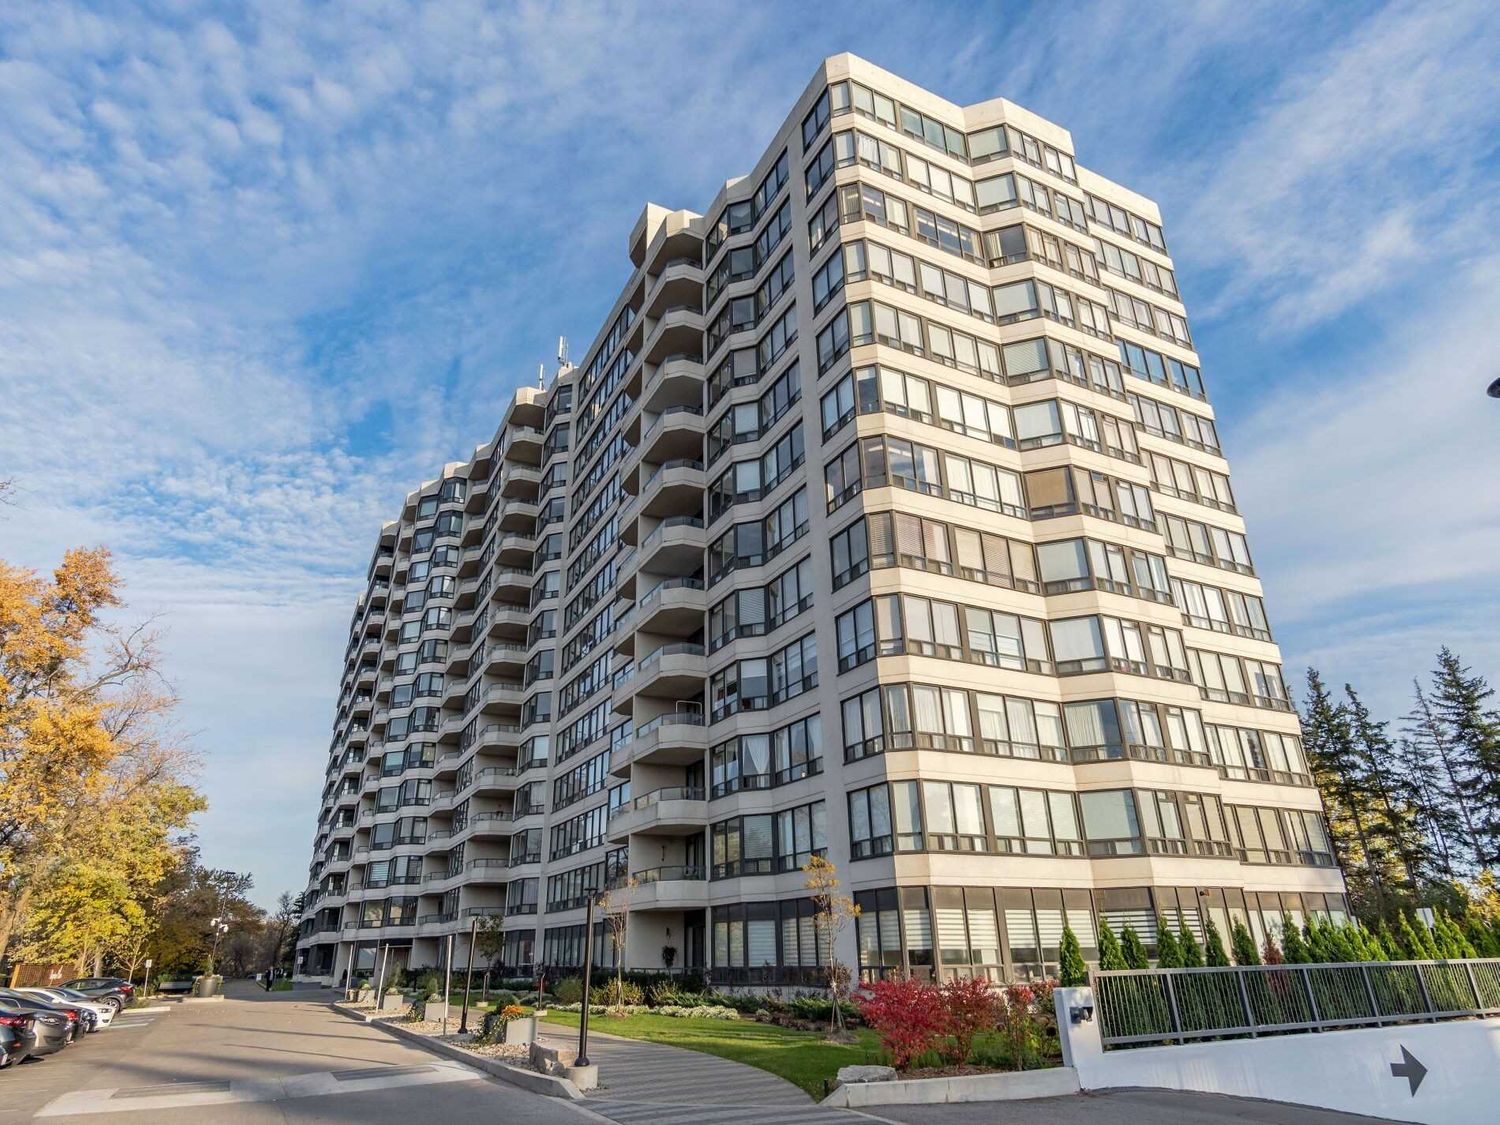 8501 Bayview Avenue. Bayview Towers Condos is located in  Richmond Hill, Toronto - image #1 of 3